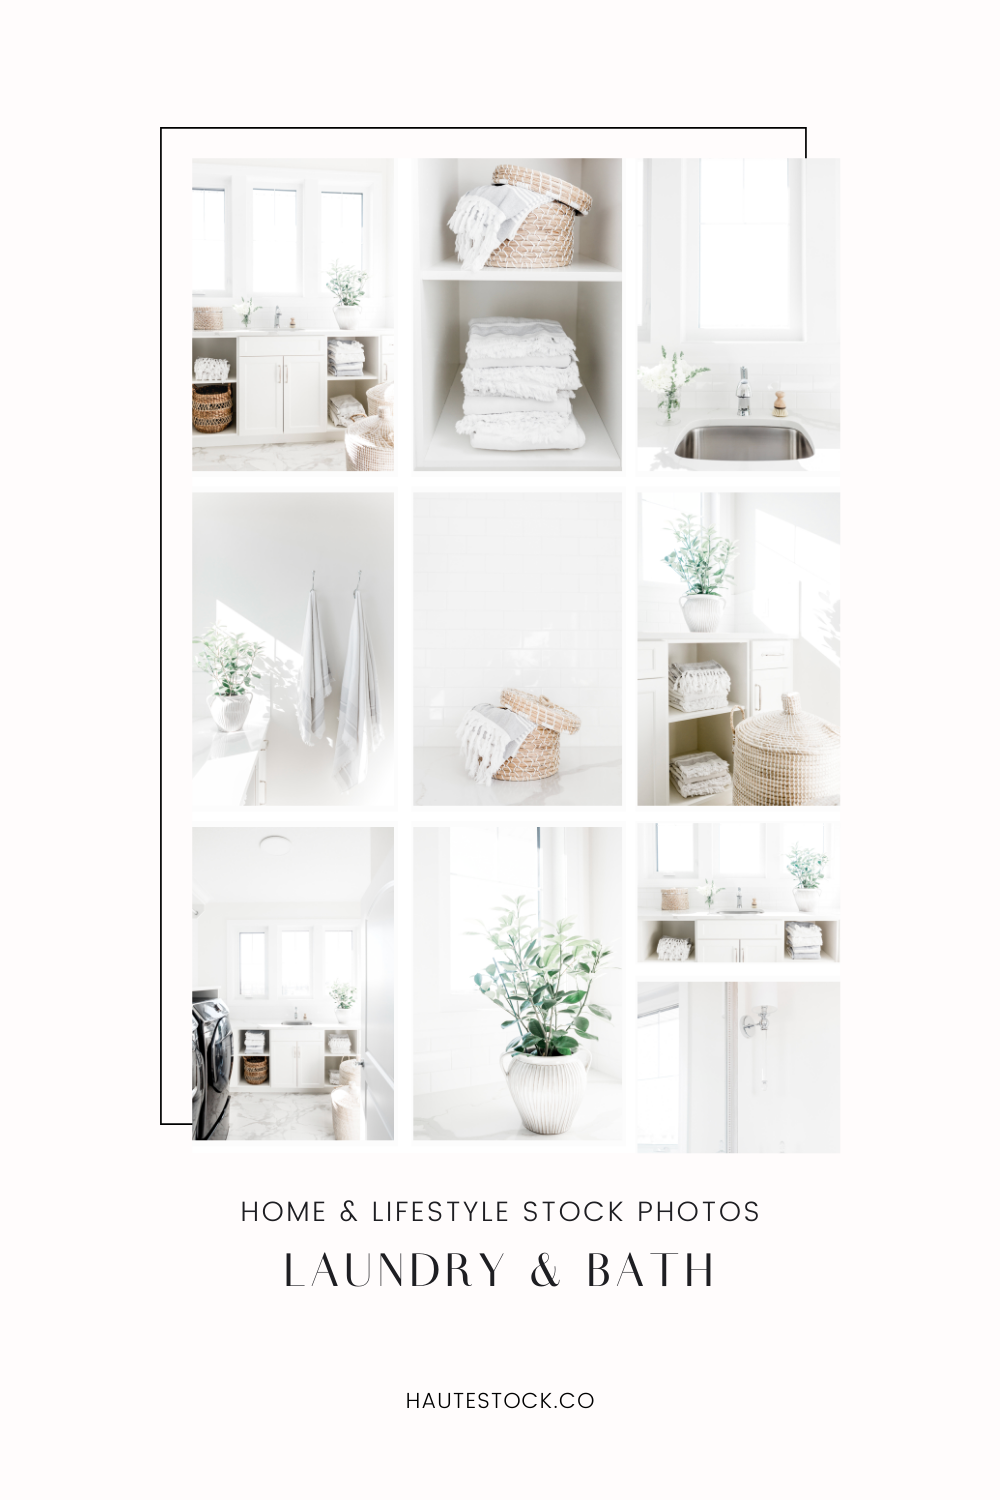 Light and airy laundry room stock photos